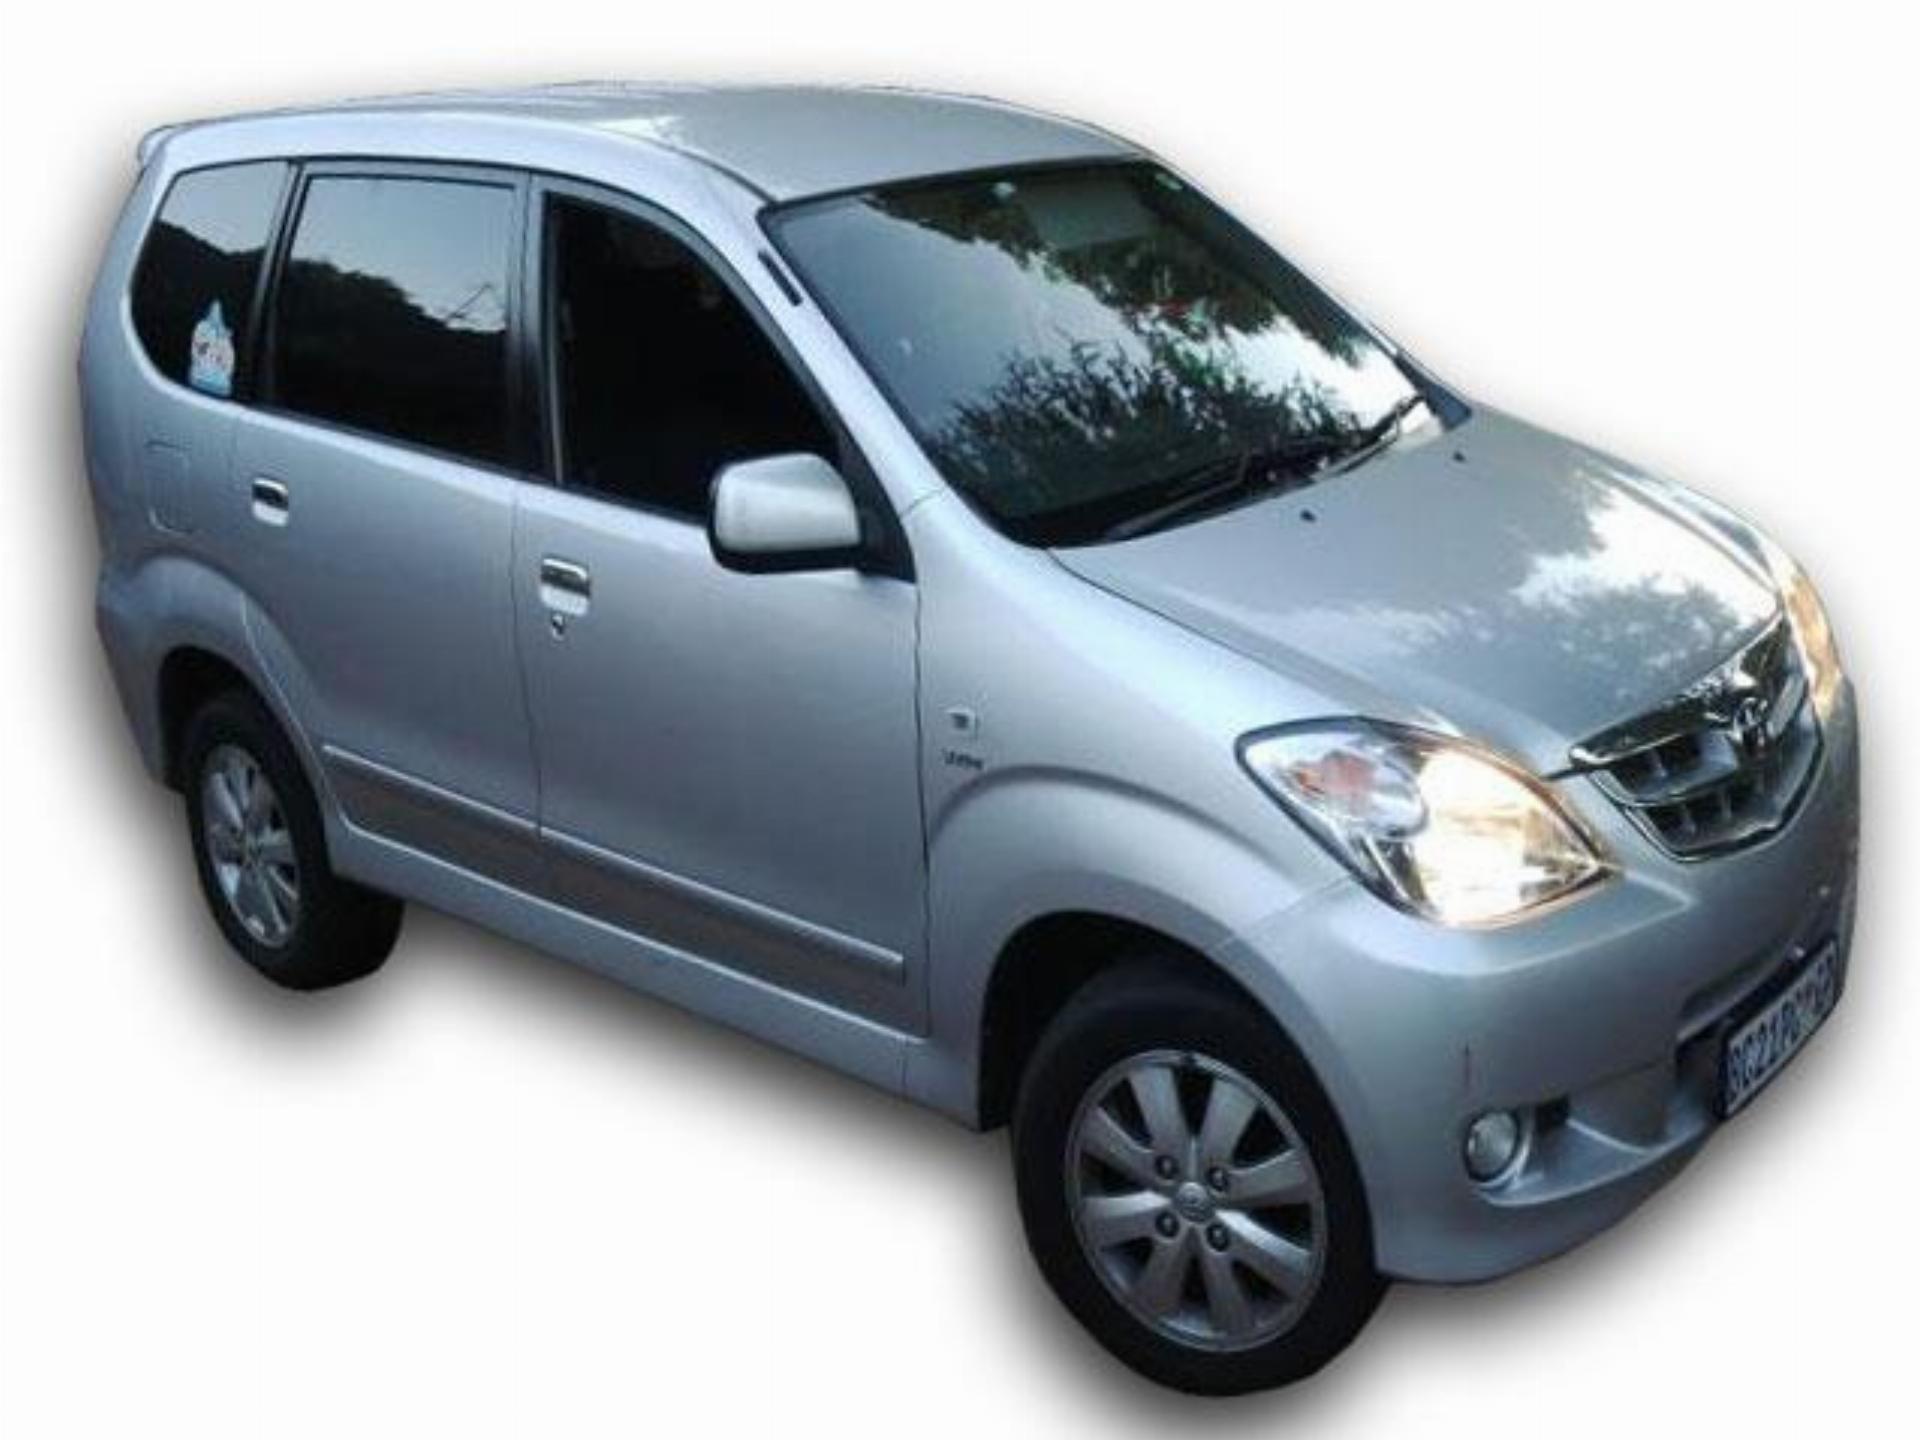 Used Toyota Avanza 1.5 TX 2011 on auction - PV1002454